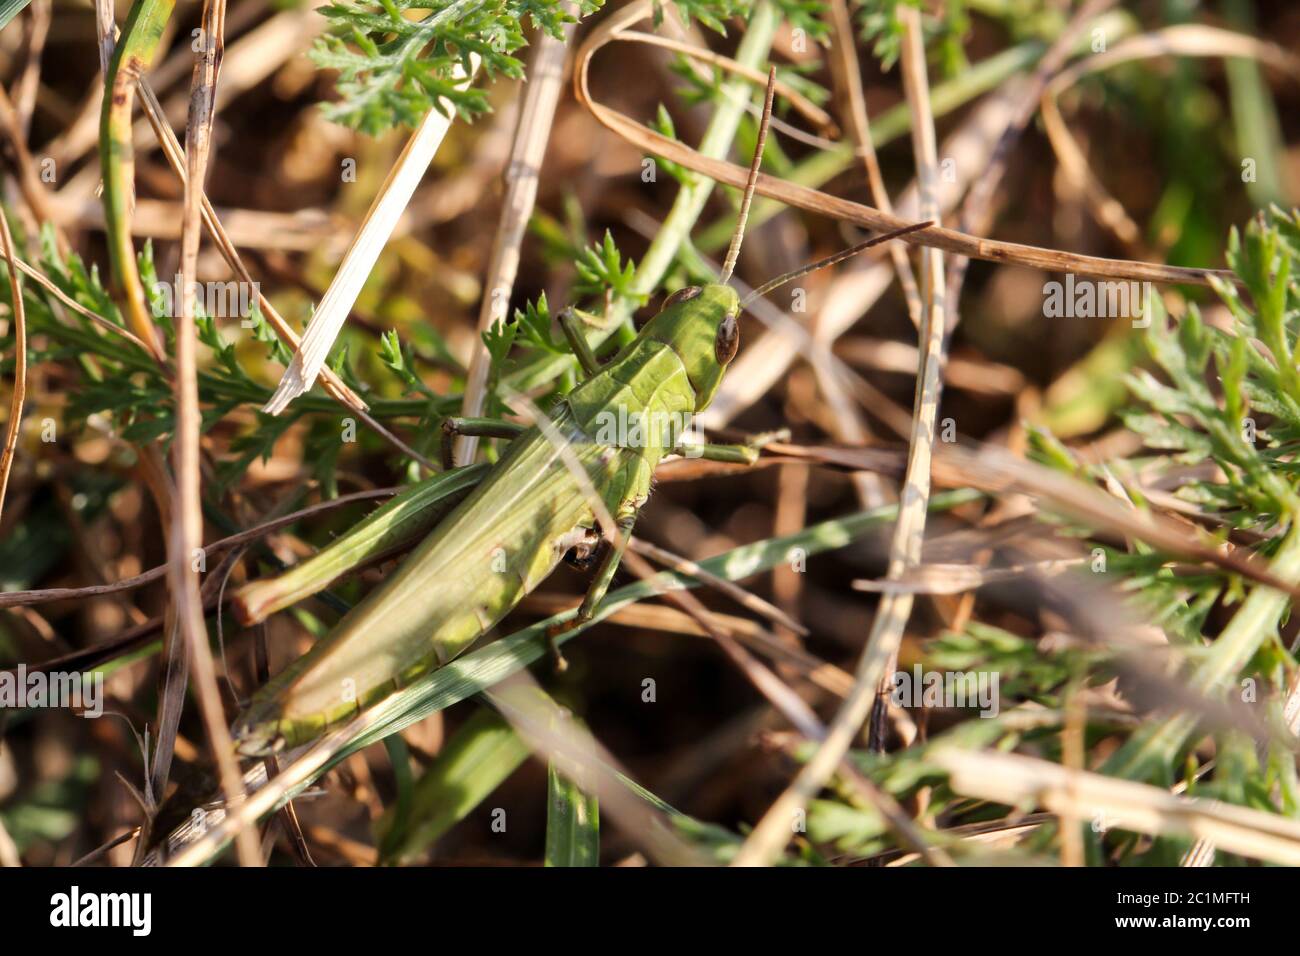 big green grasshopper on grass and plants Stock Photo